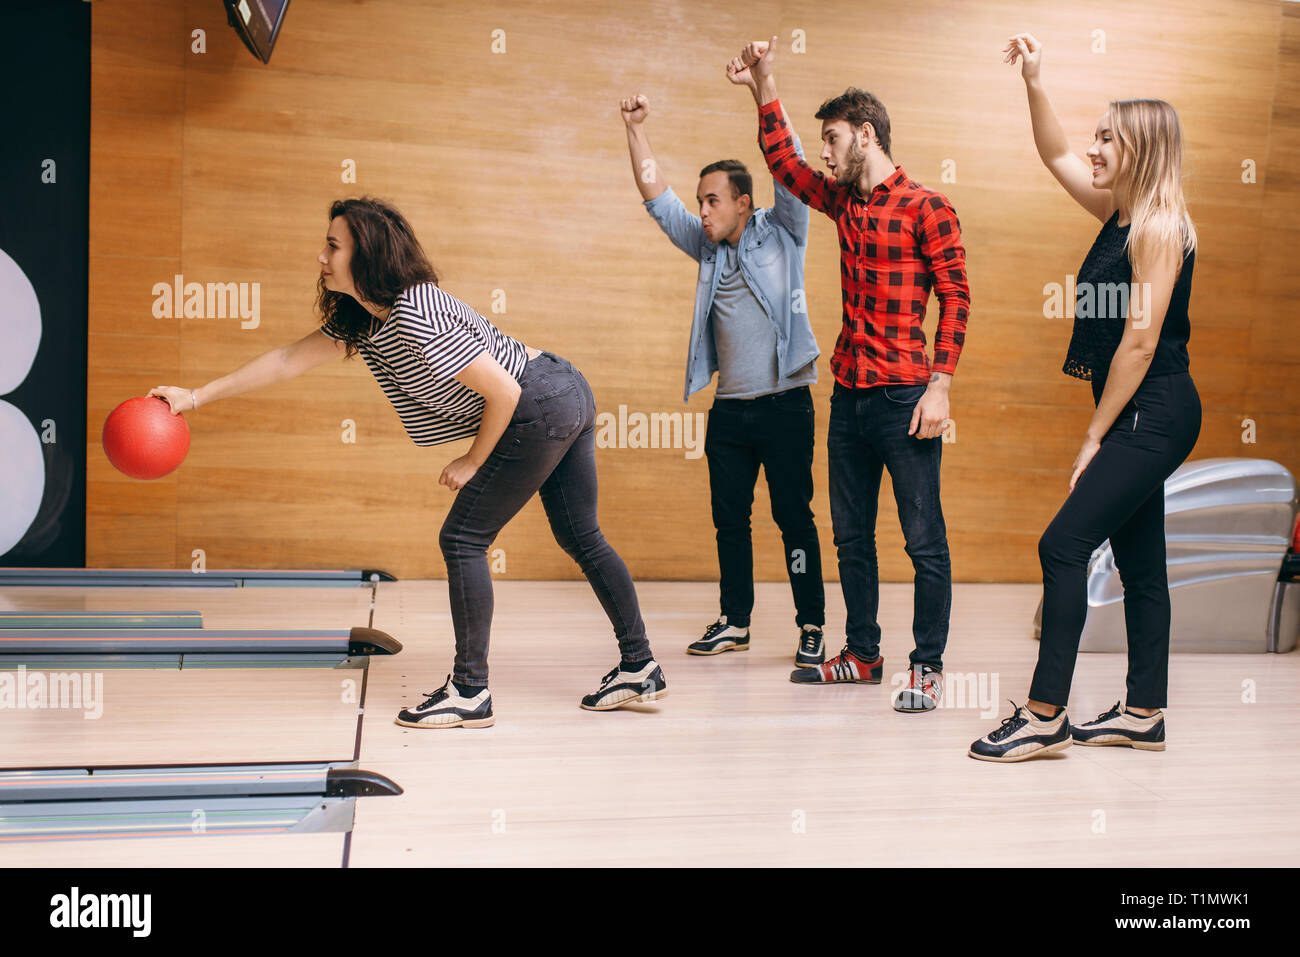 Female bowler on lane, ball throwing in action Stock Photo